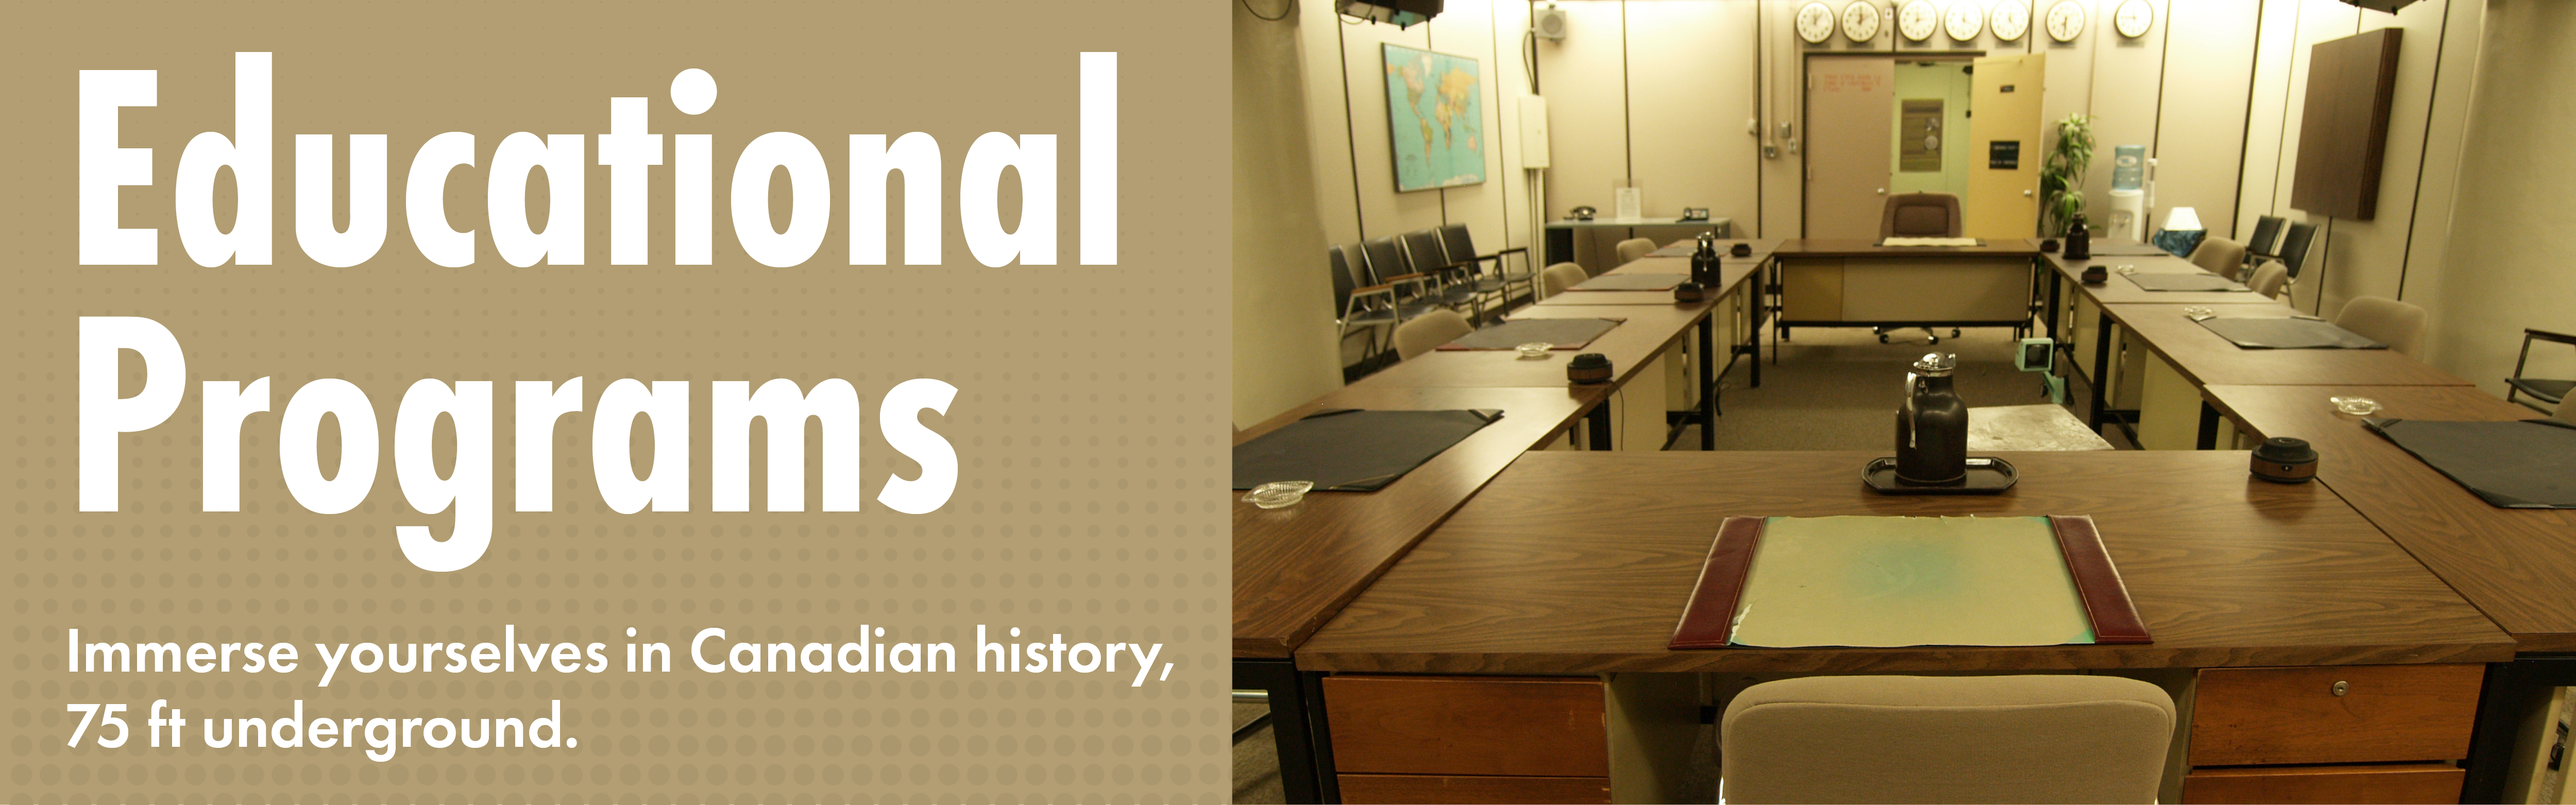 White text on a textured beige background reads "Educational Programs: Immerse yourselves in Canadian history, 75 ft underground." An image on the right shows the square of tables and chairs set up inside the War Cabinet Room at the Diefenbunker.